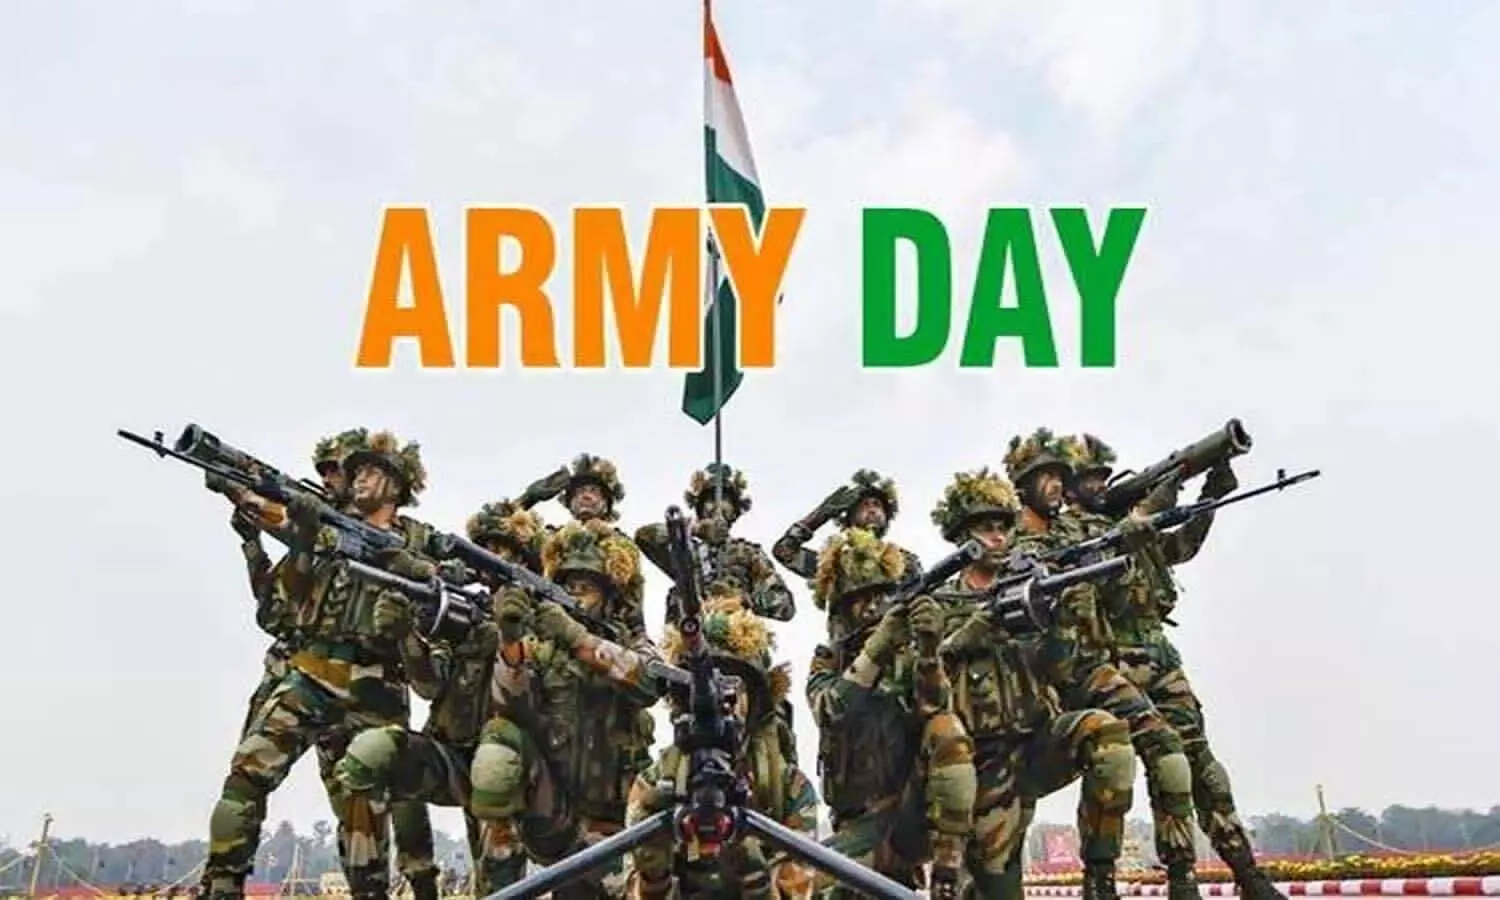 You also celebrate Army Day